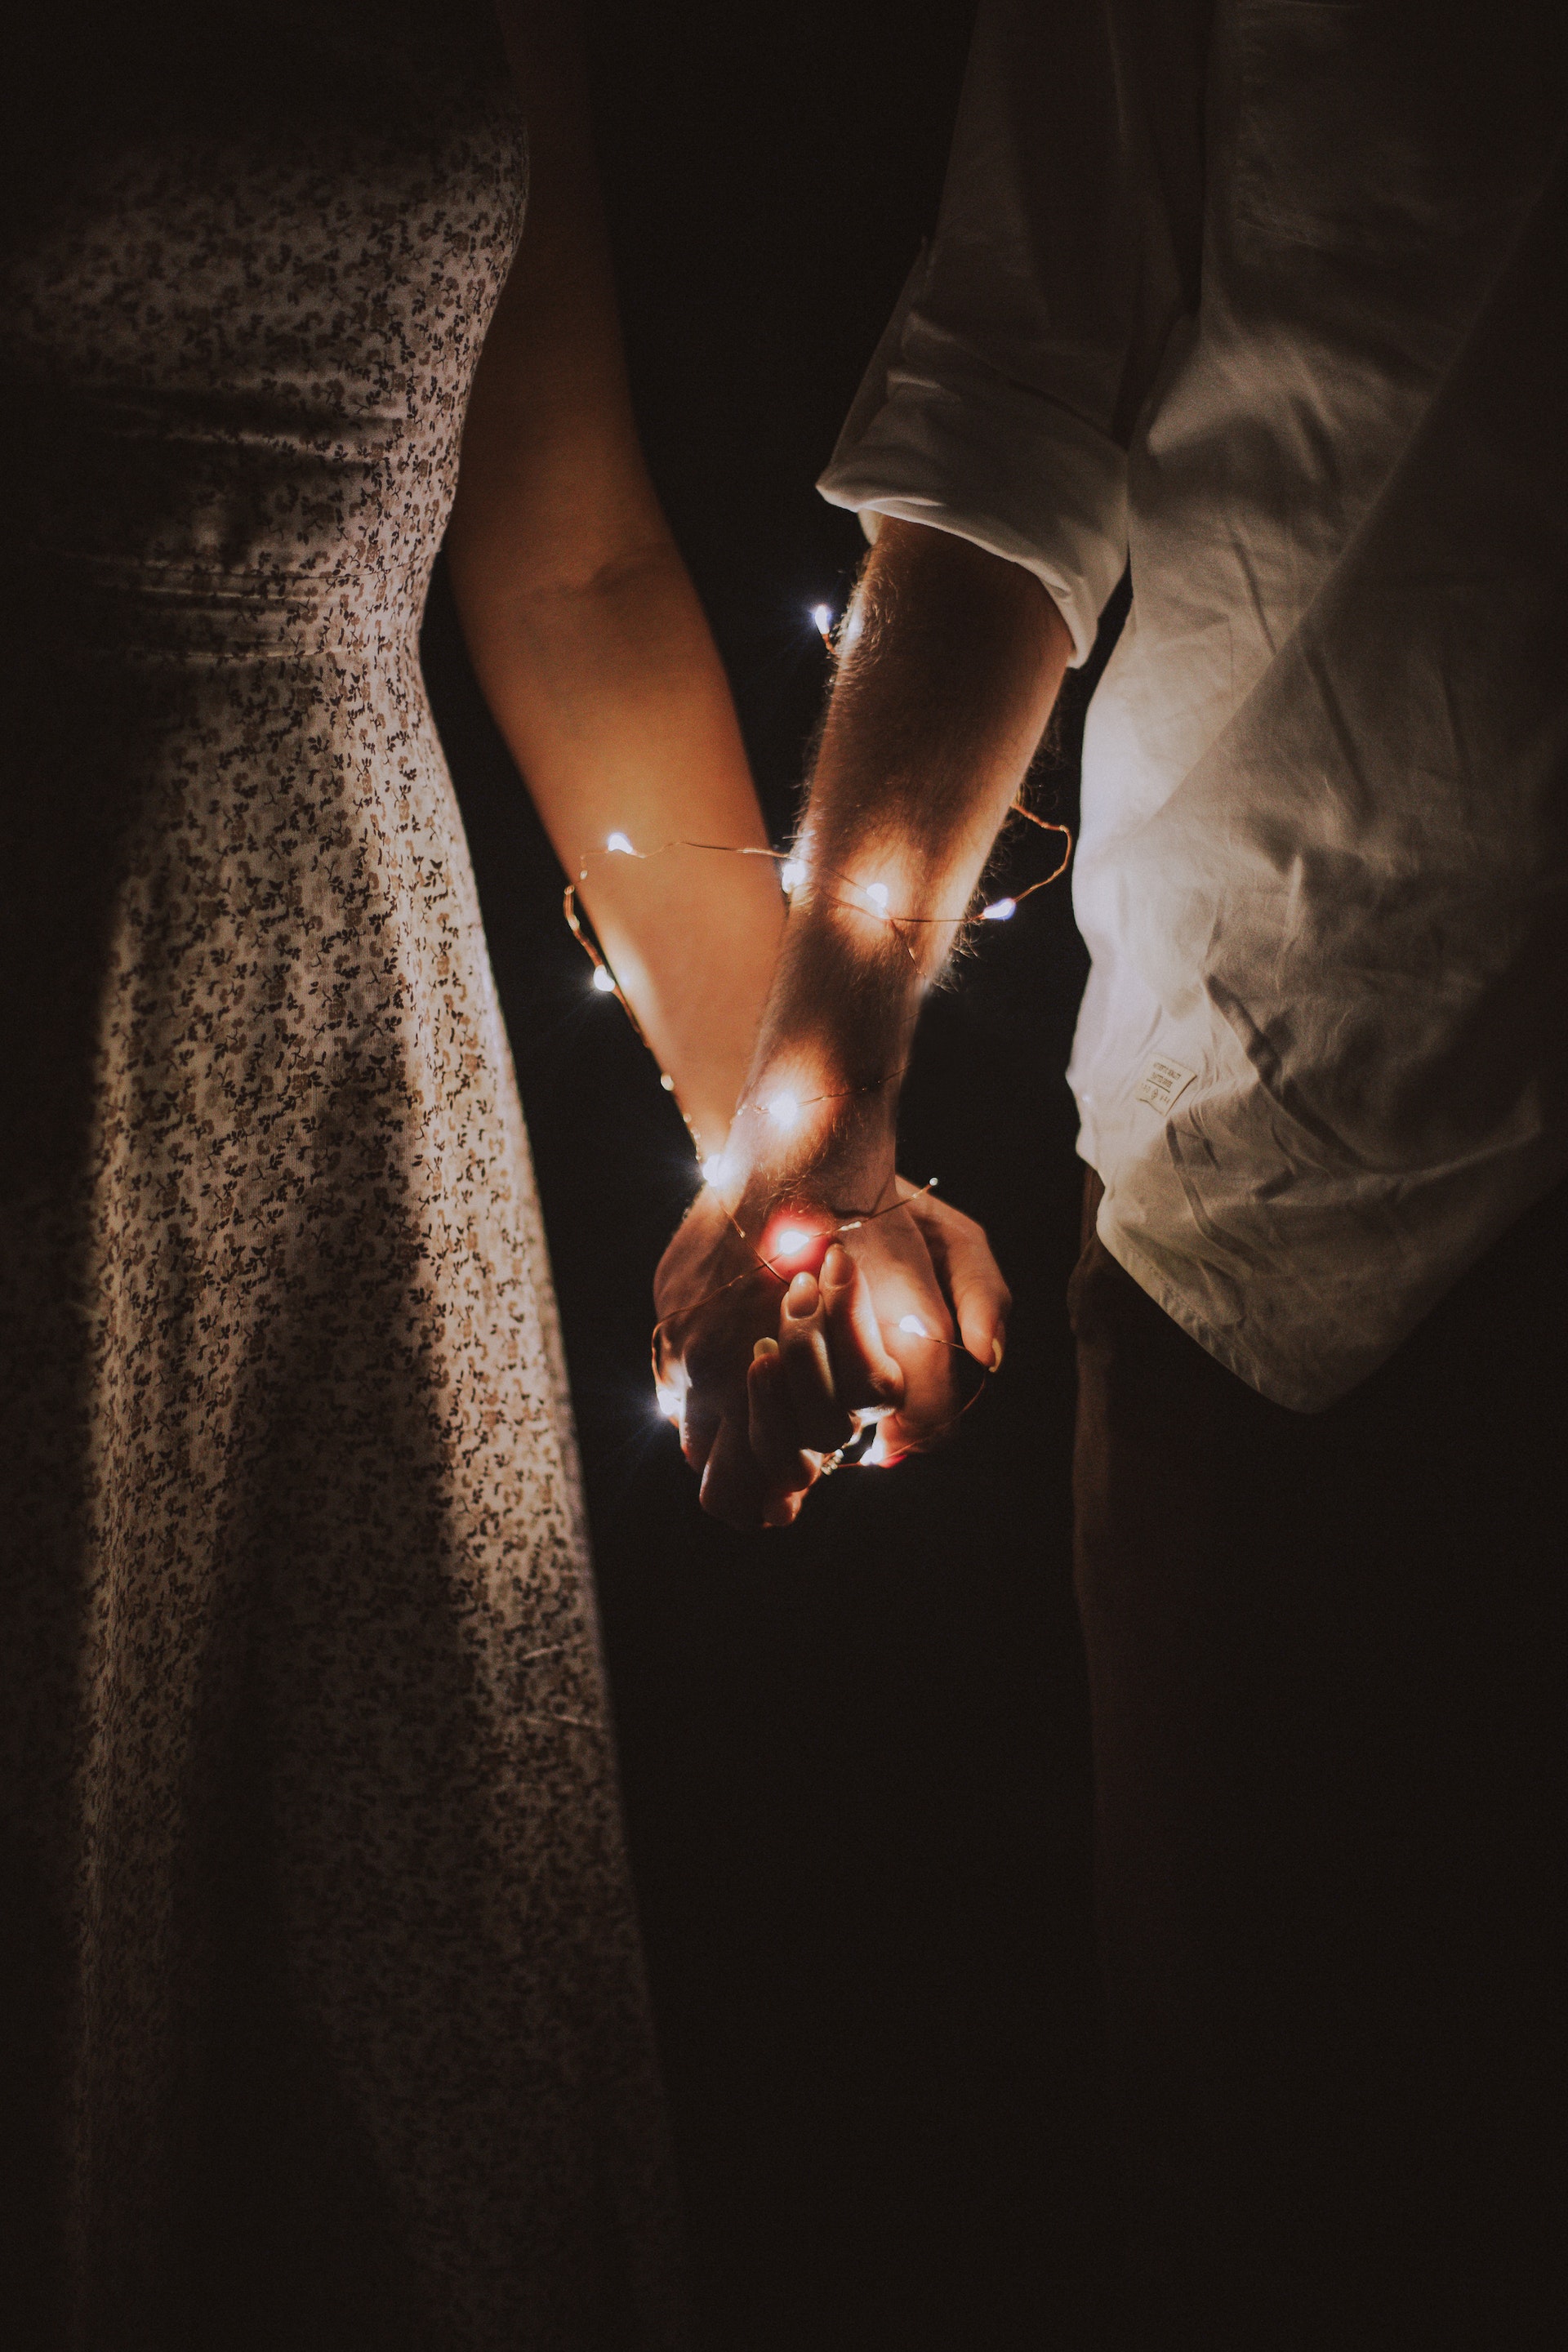 Man and Woman Holding Each Others Hand Wrapped With String Lights